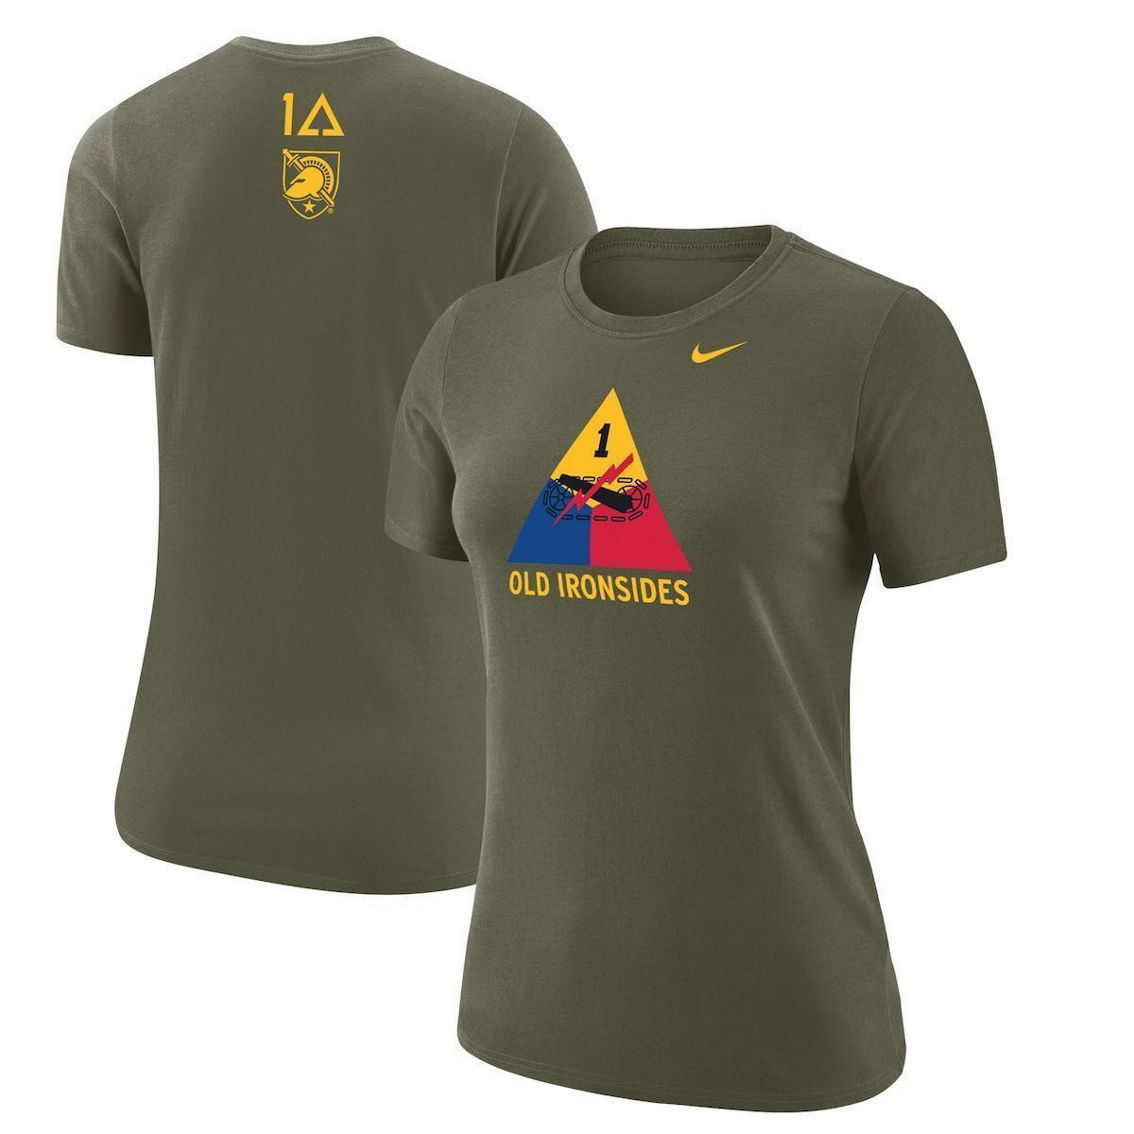 Nike Women's Olive Army Black Knights 1st Armored Division Old Ironsides Operation Torch T-Shirt - Image 2 of 4